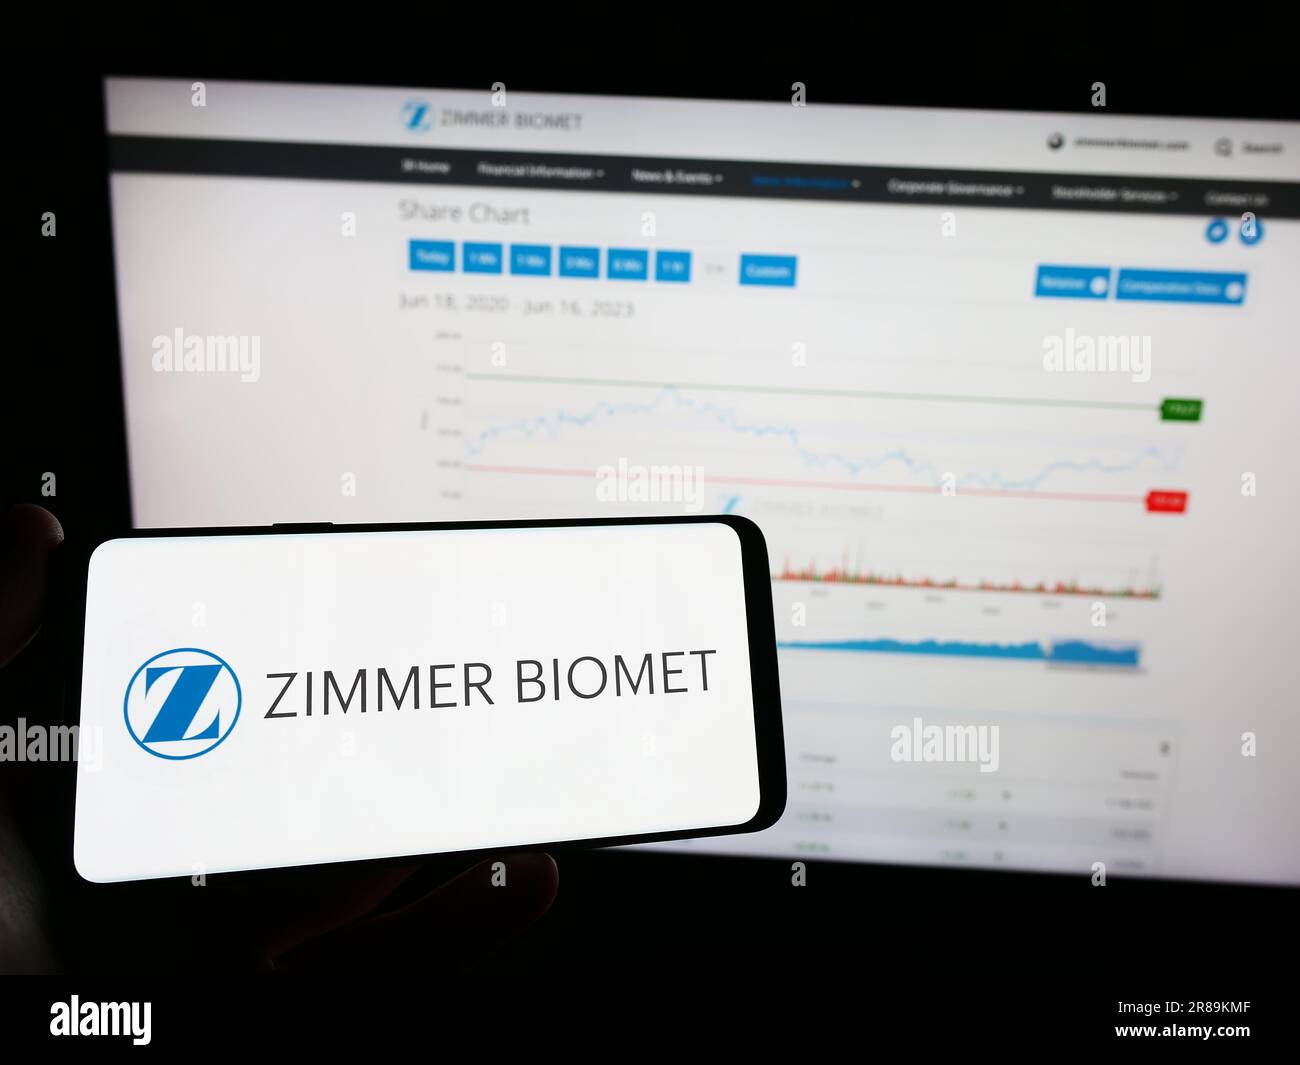 Person holding mobile phone with logo of American company Zimmer Biomet Holdings Inc. on screen in front of web page. Focus on phone display. Stock Photo